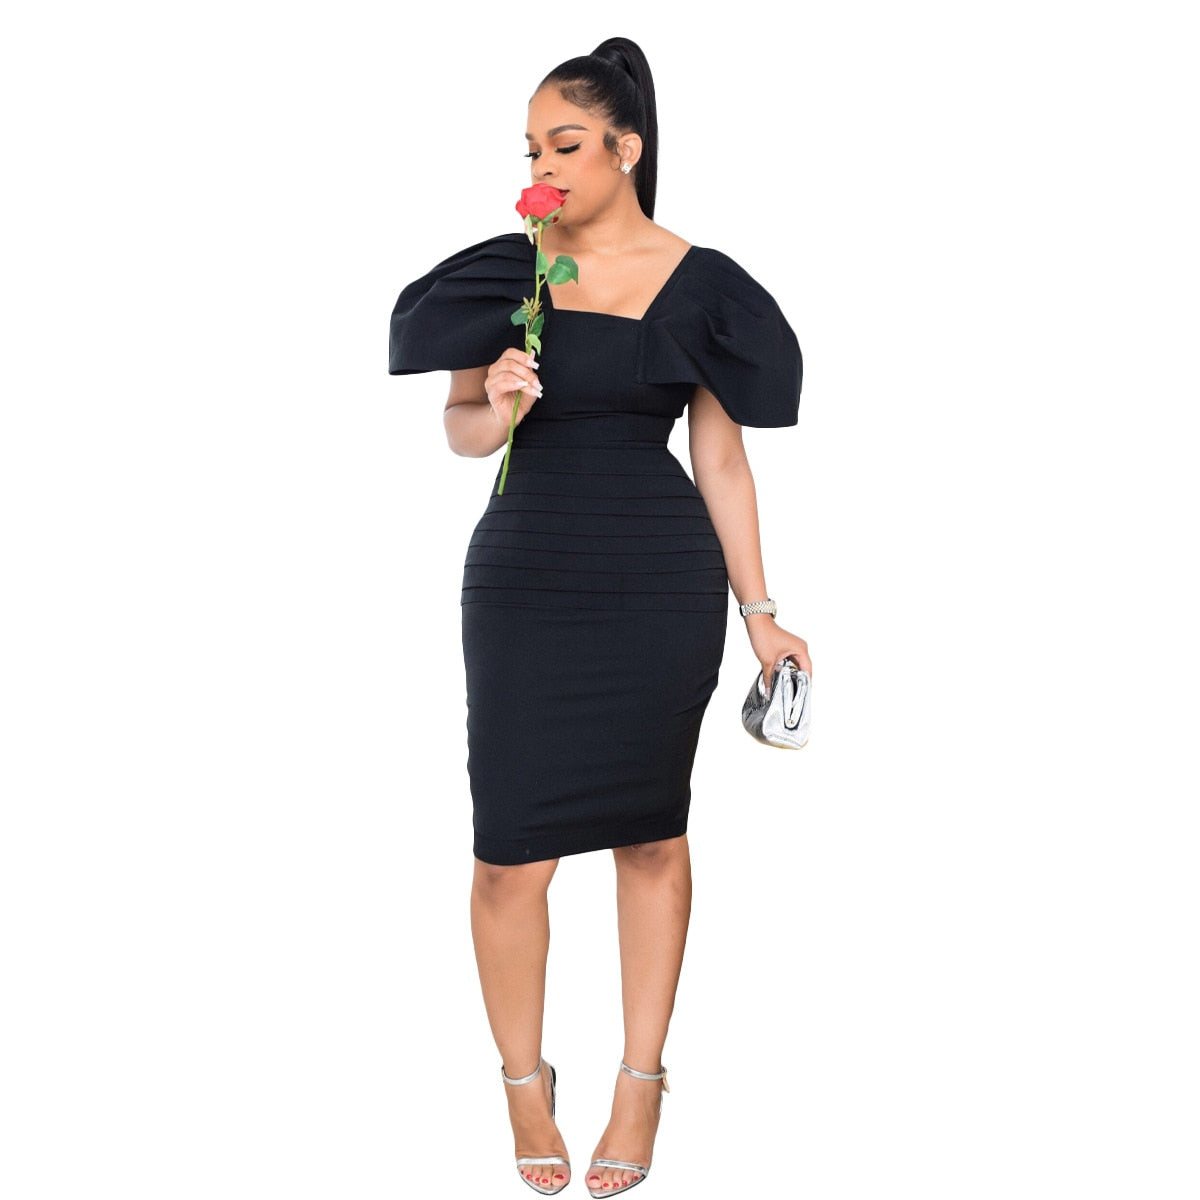 Summer Ruffle Work Dress Women Casual Solid Butterfly Short Sleeve Square Collar Tight Waist Bodycon Party Business Midi Dress